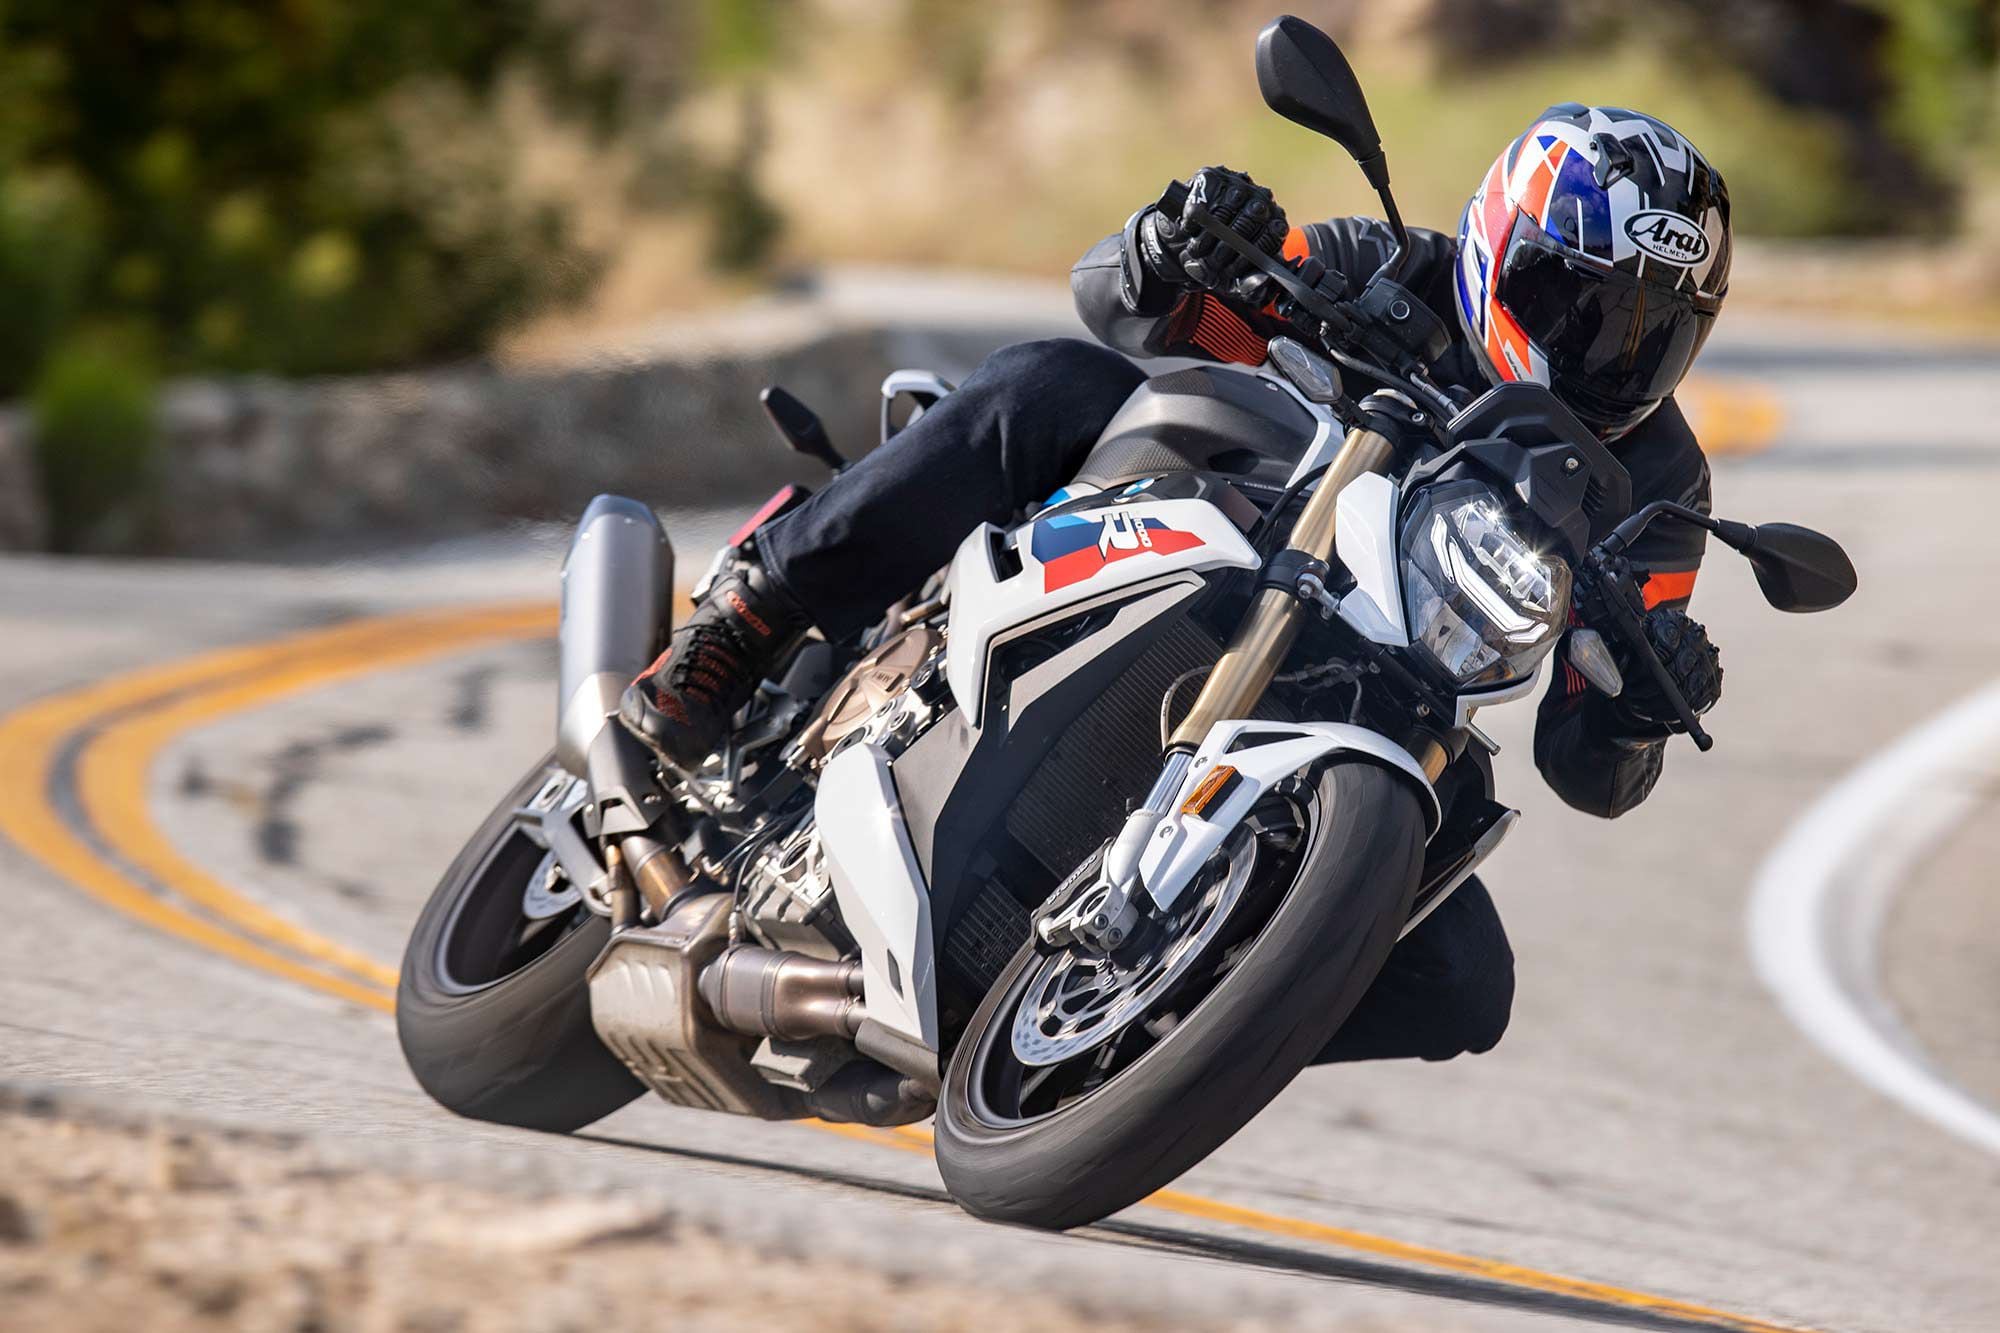 Smooth off-corner power delivery and well-sorted fueling makes fine throttle adjustments consistent and predictable.